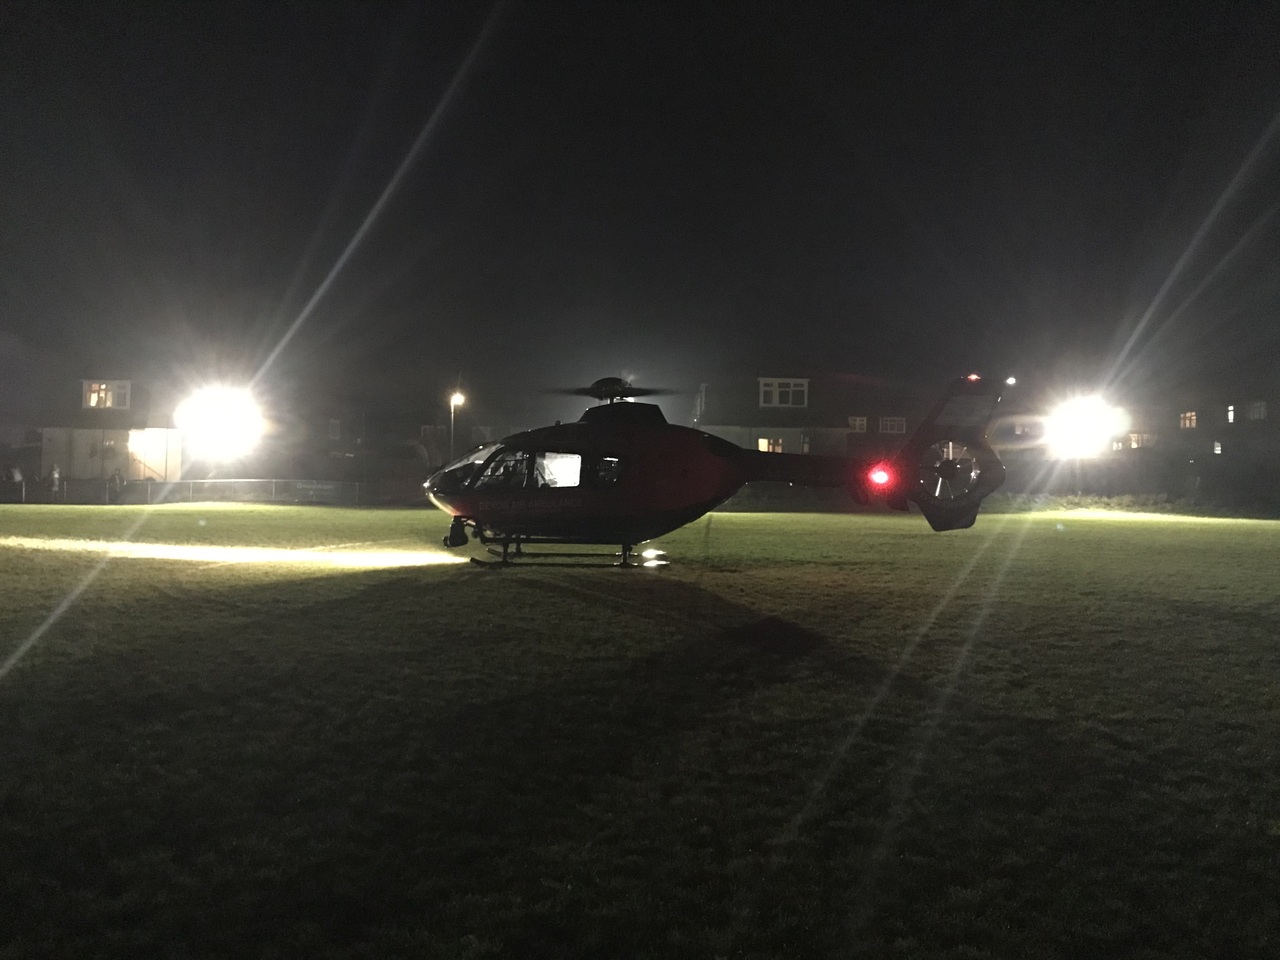 A Devon Air Ambulance helicopter at night.